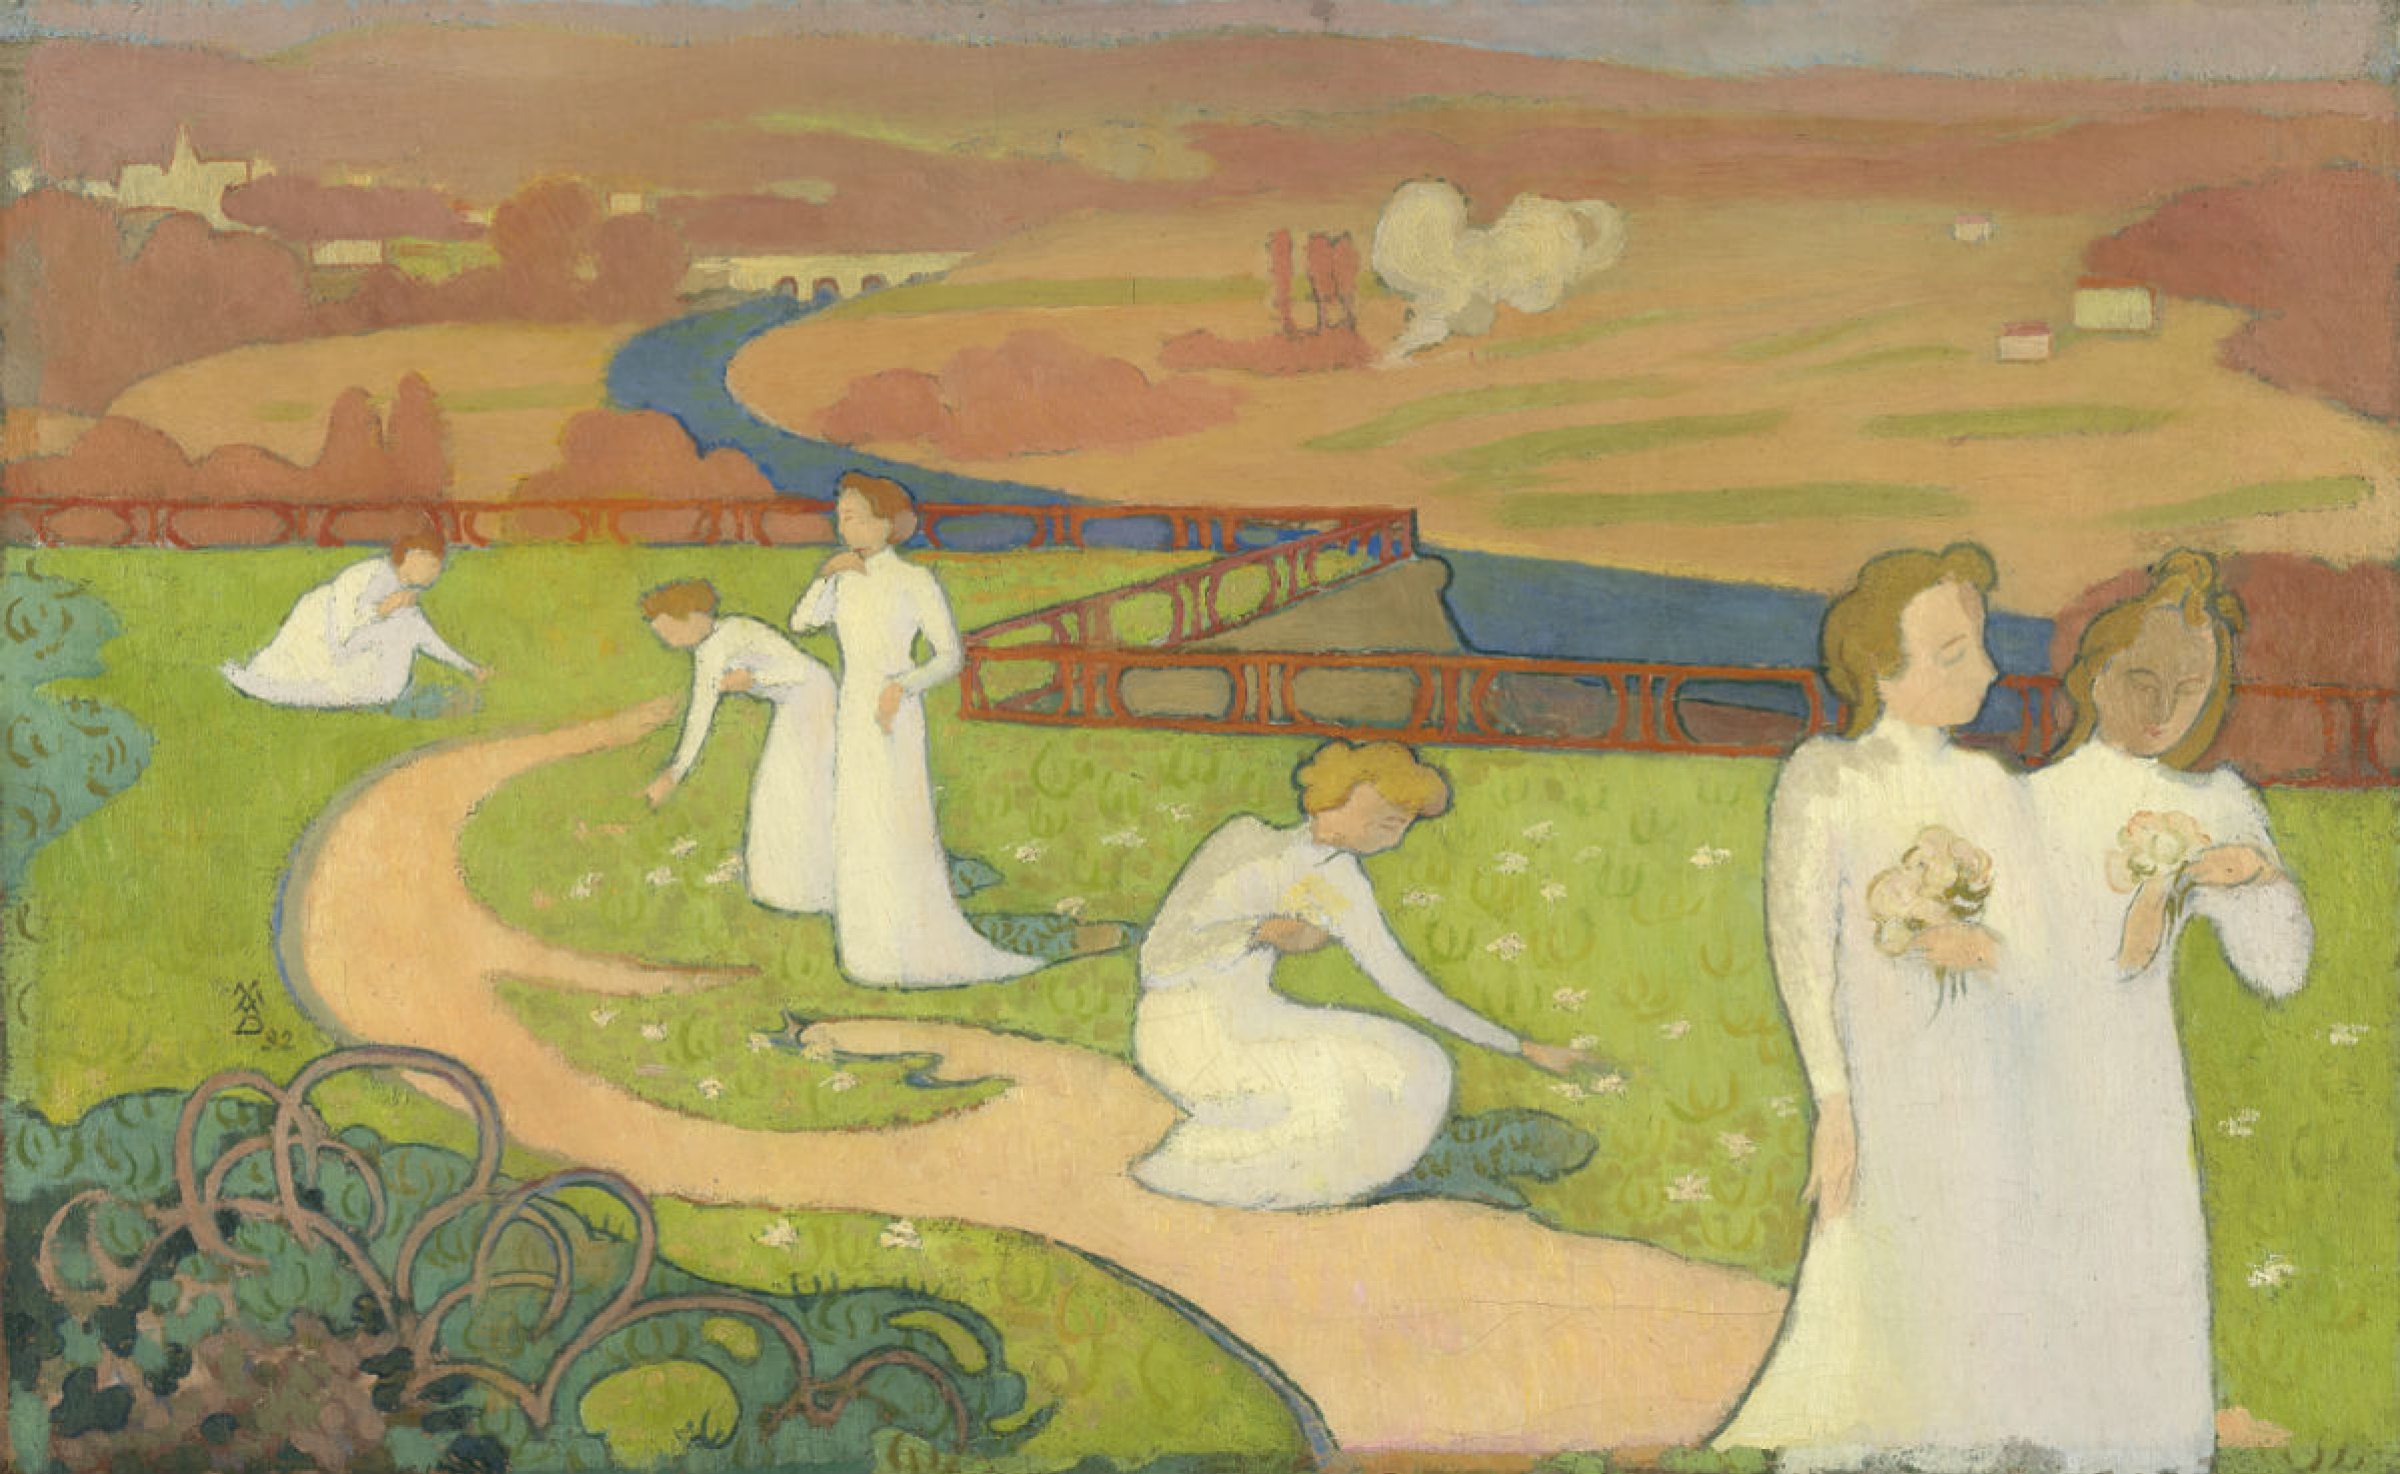 Maurice Denis, April (Panel for a young girl’s room), 1892, oil on canvas, 38 x 61.3 cm (Kröller-Müller Museum, Otterlo)